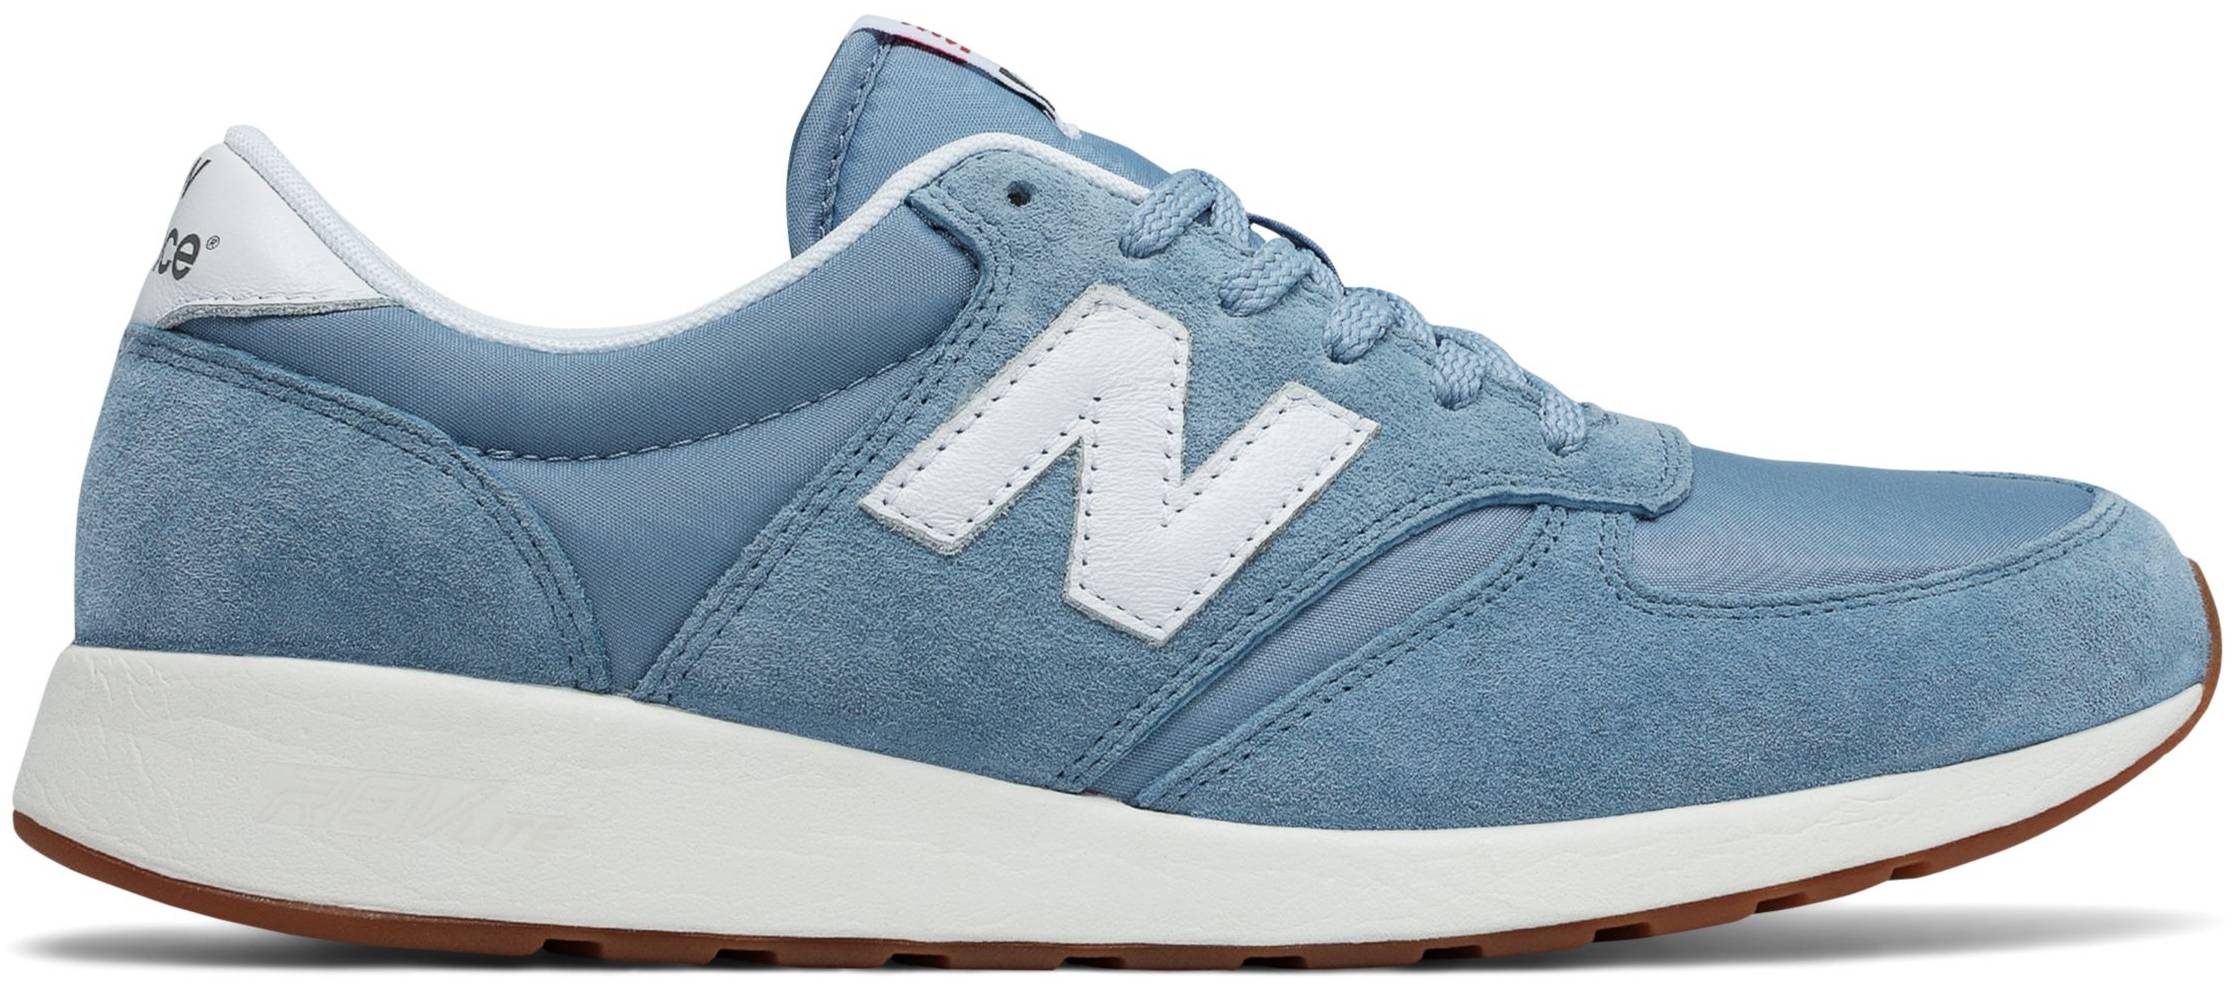 New Balance 420 Re-Engineered sneakers (only $50) | RunRepeat